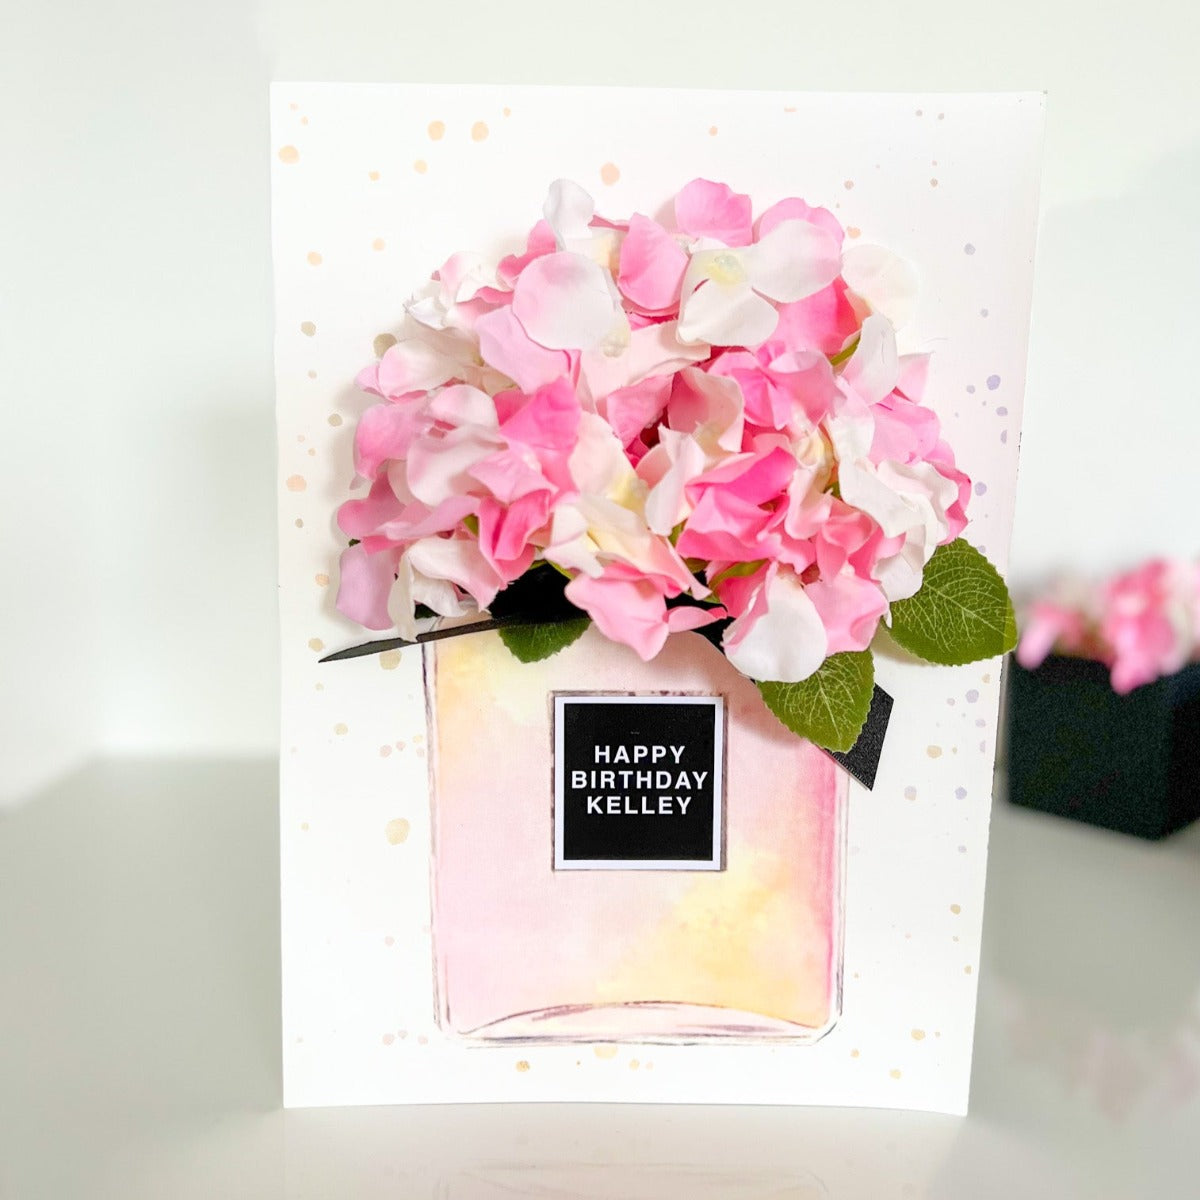 Happy Birthday Wife Card handmade with scented pink flowers | The Luxe Co